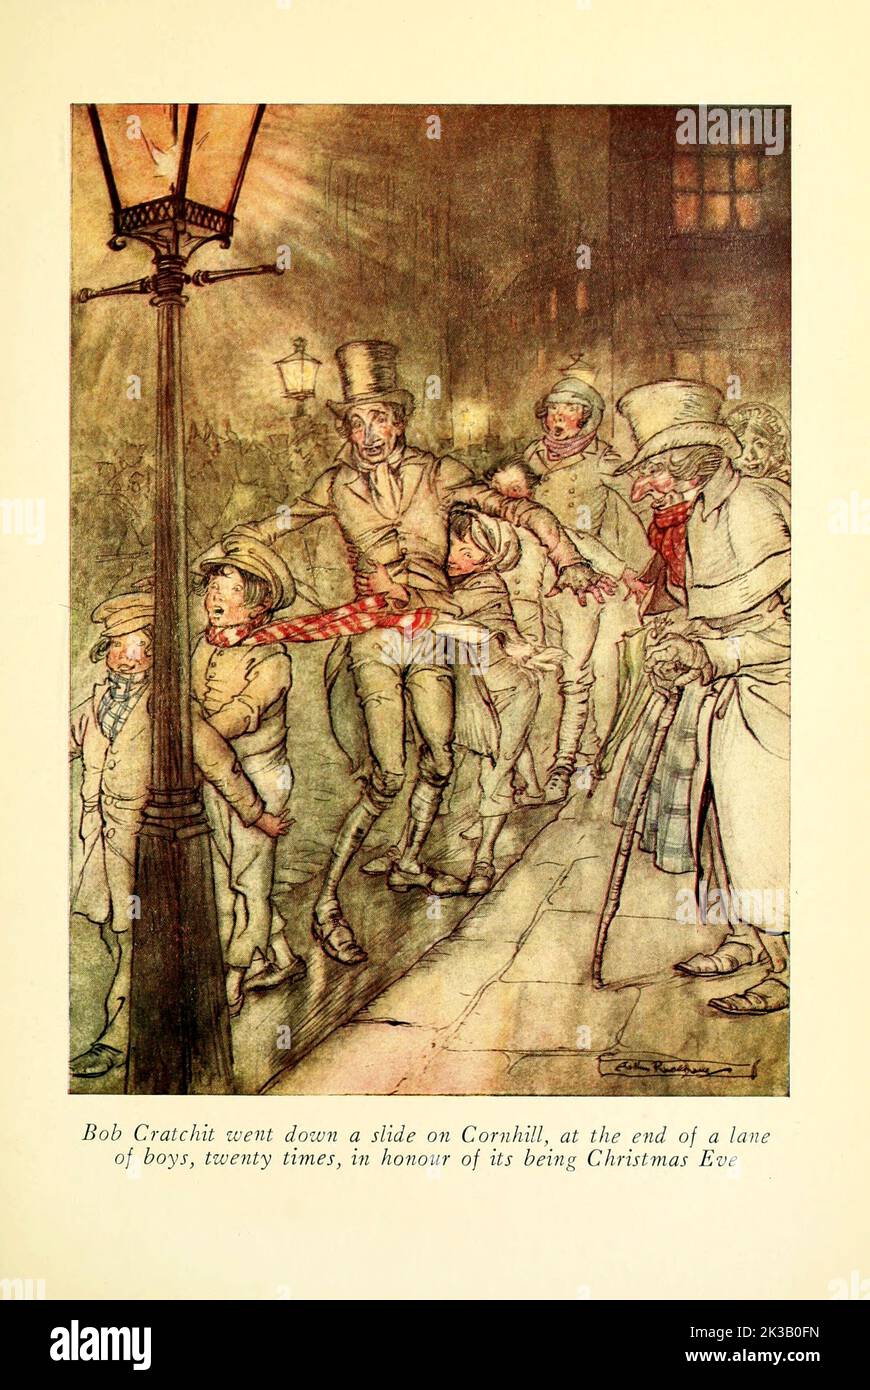 Bob Cratchit went down a slide on Cornhill, at the end of a lane of boys, twenty times, in honour of its being Christmas Eve Illustrated by Arthur Rackham from the book ' A Christmas carol ' by Charles Dickens, Publication date 1915 Publisher London : William Heinemann ; Philadelphia : J.B. Lippincott Co. Stock Photo